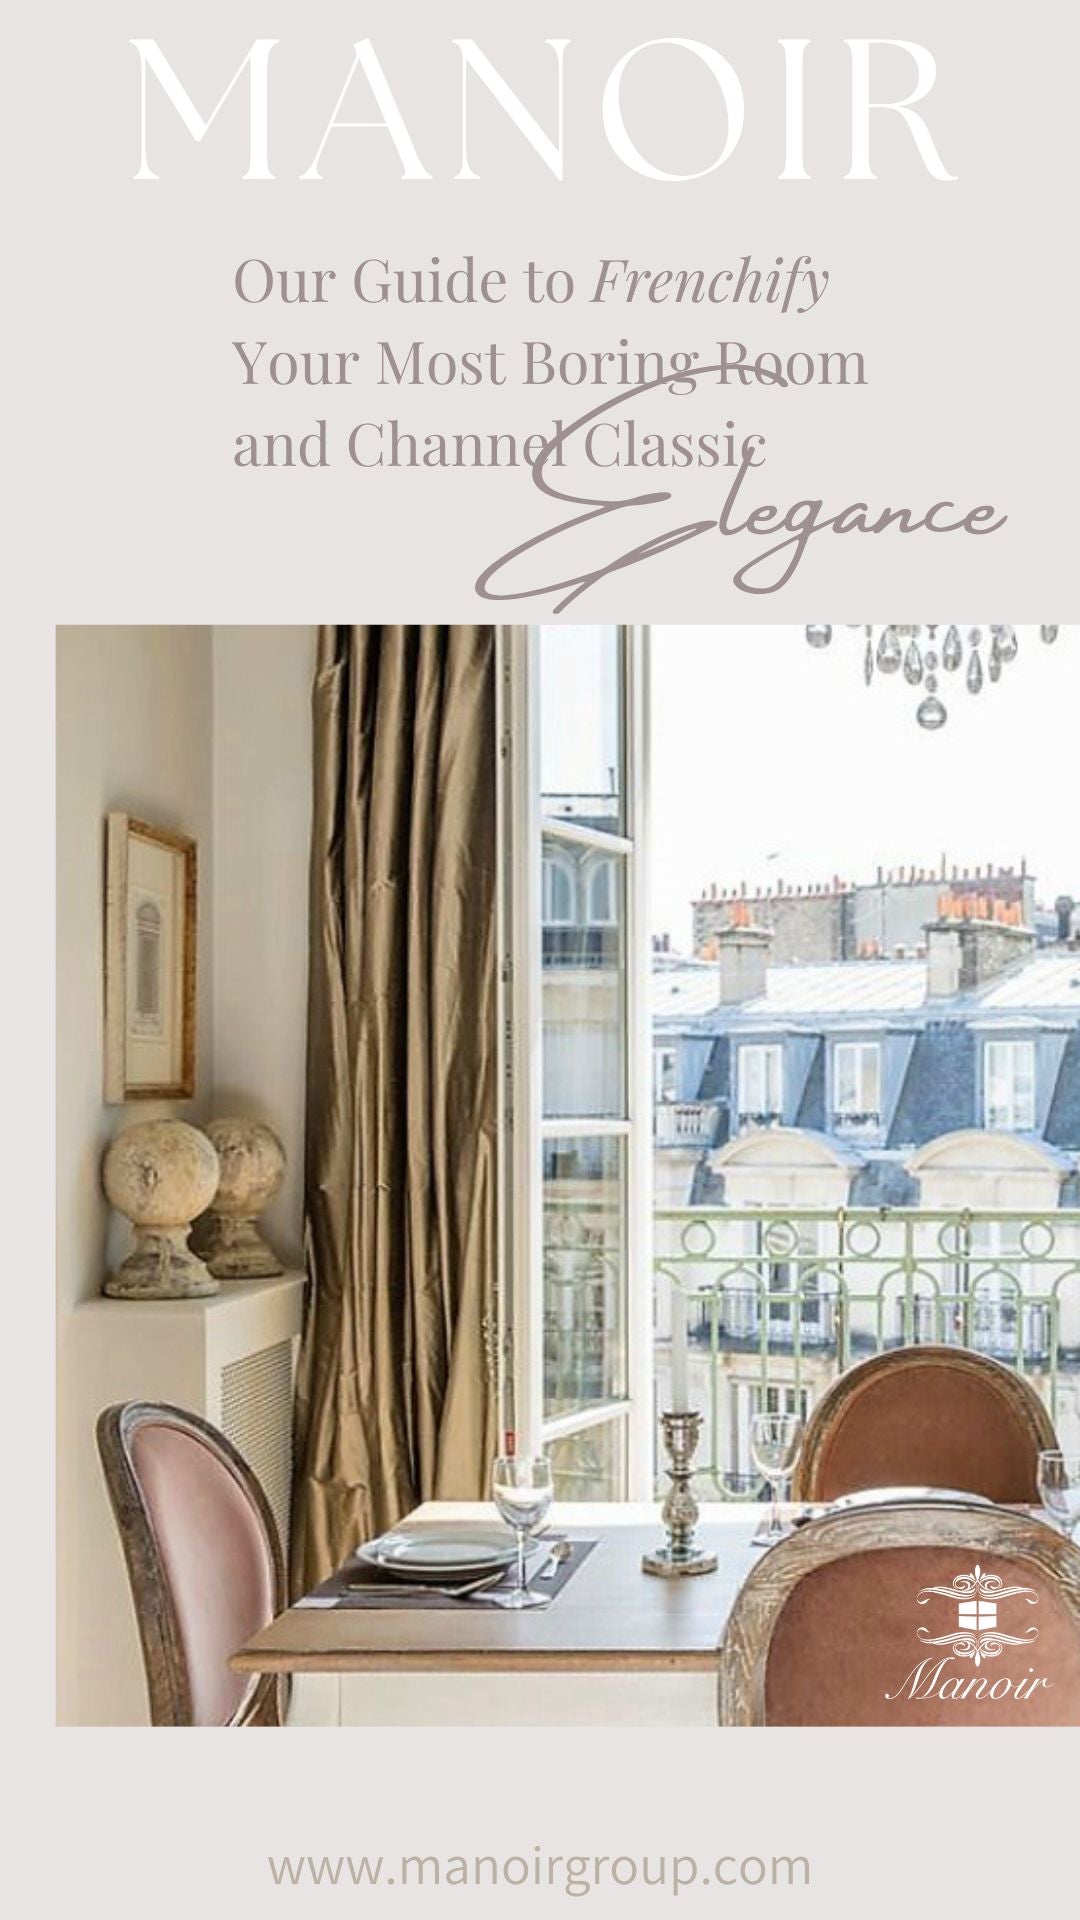 Ooh La La! How to Frenchify Your Most Boring Room and Channel Classic Elegance